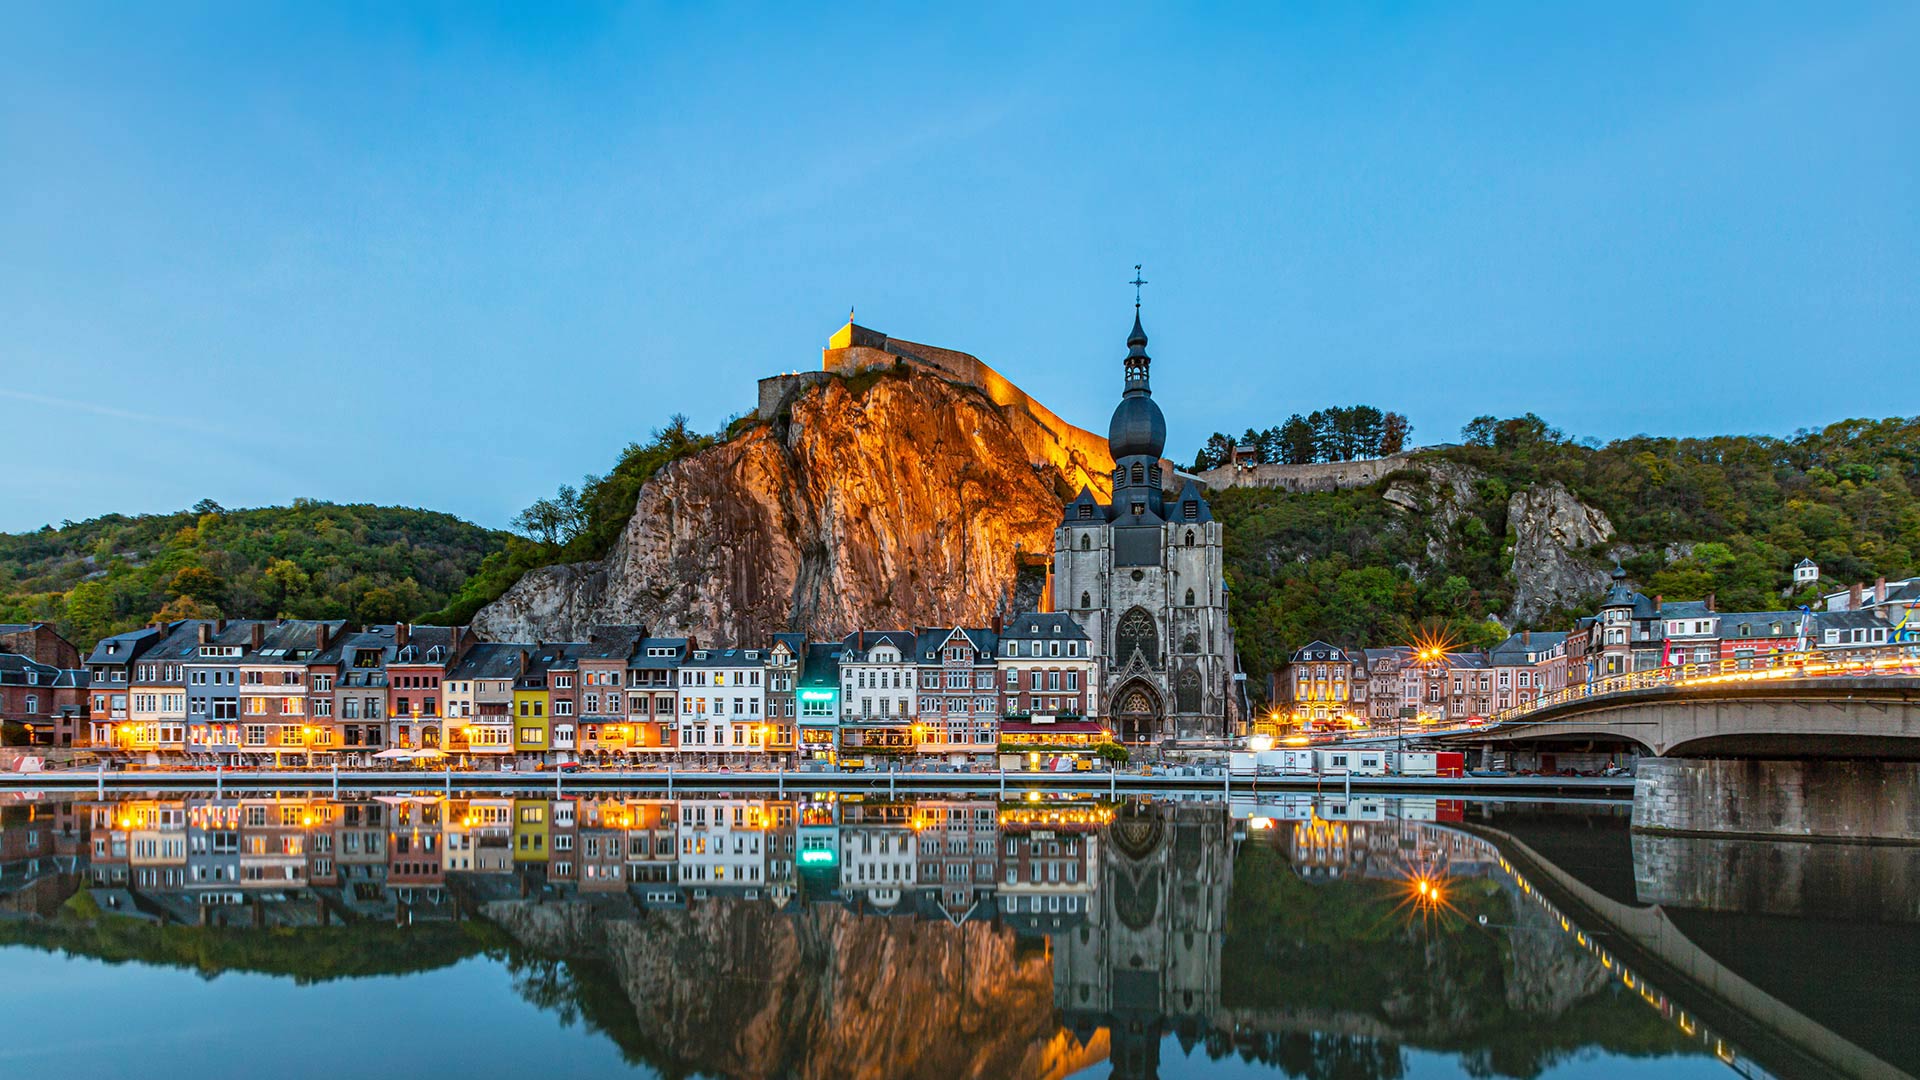 The town of Dinant and the River Meuse in Namur province, Belgium - Kadagan/Shutterstock)